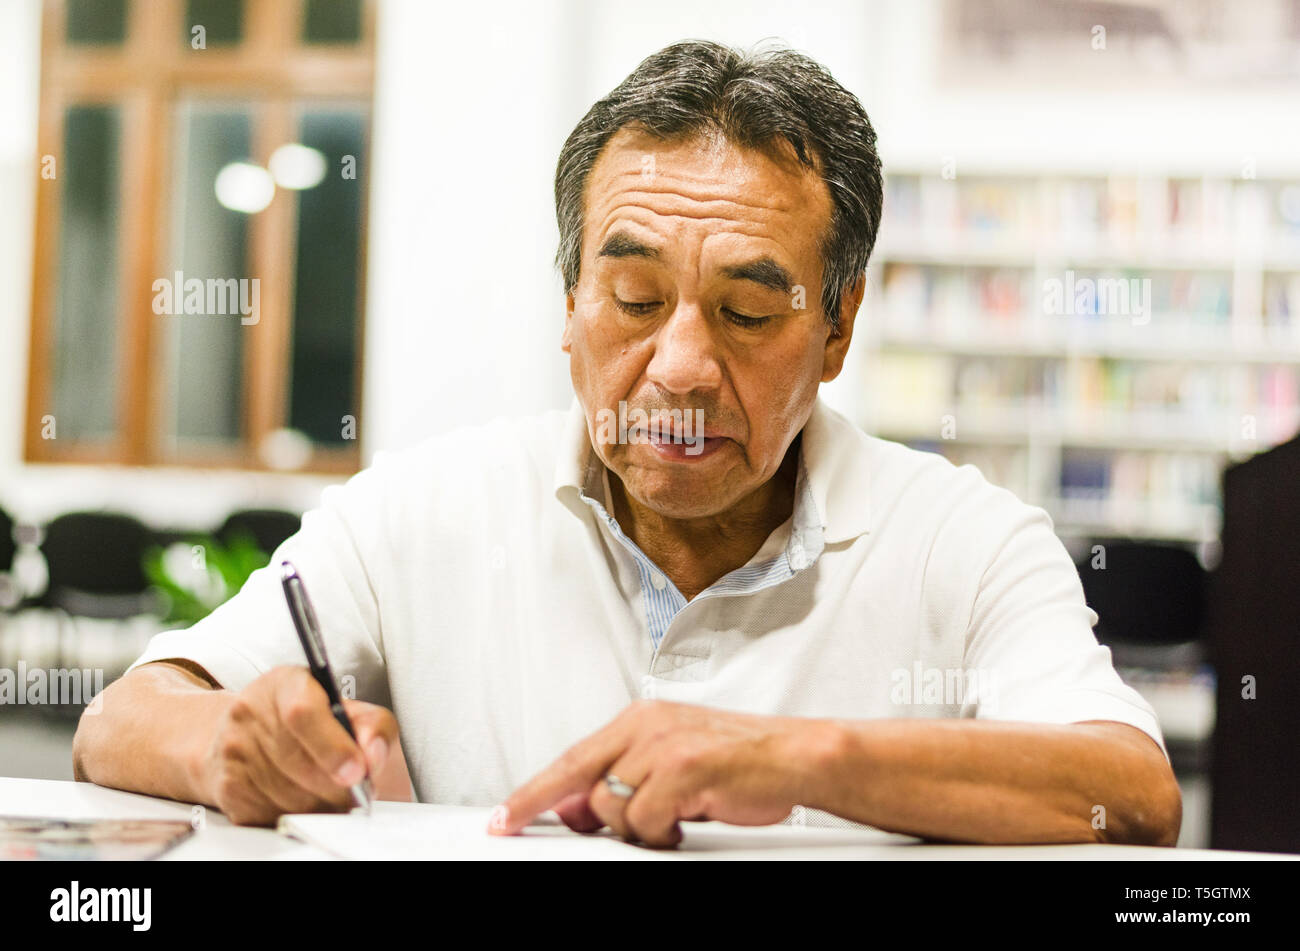 Serious senior man sitting on a library bench writing in his book. Senior man sitting in a university classroom. Stock Photo